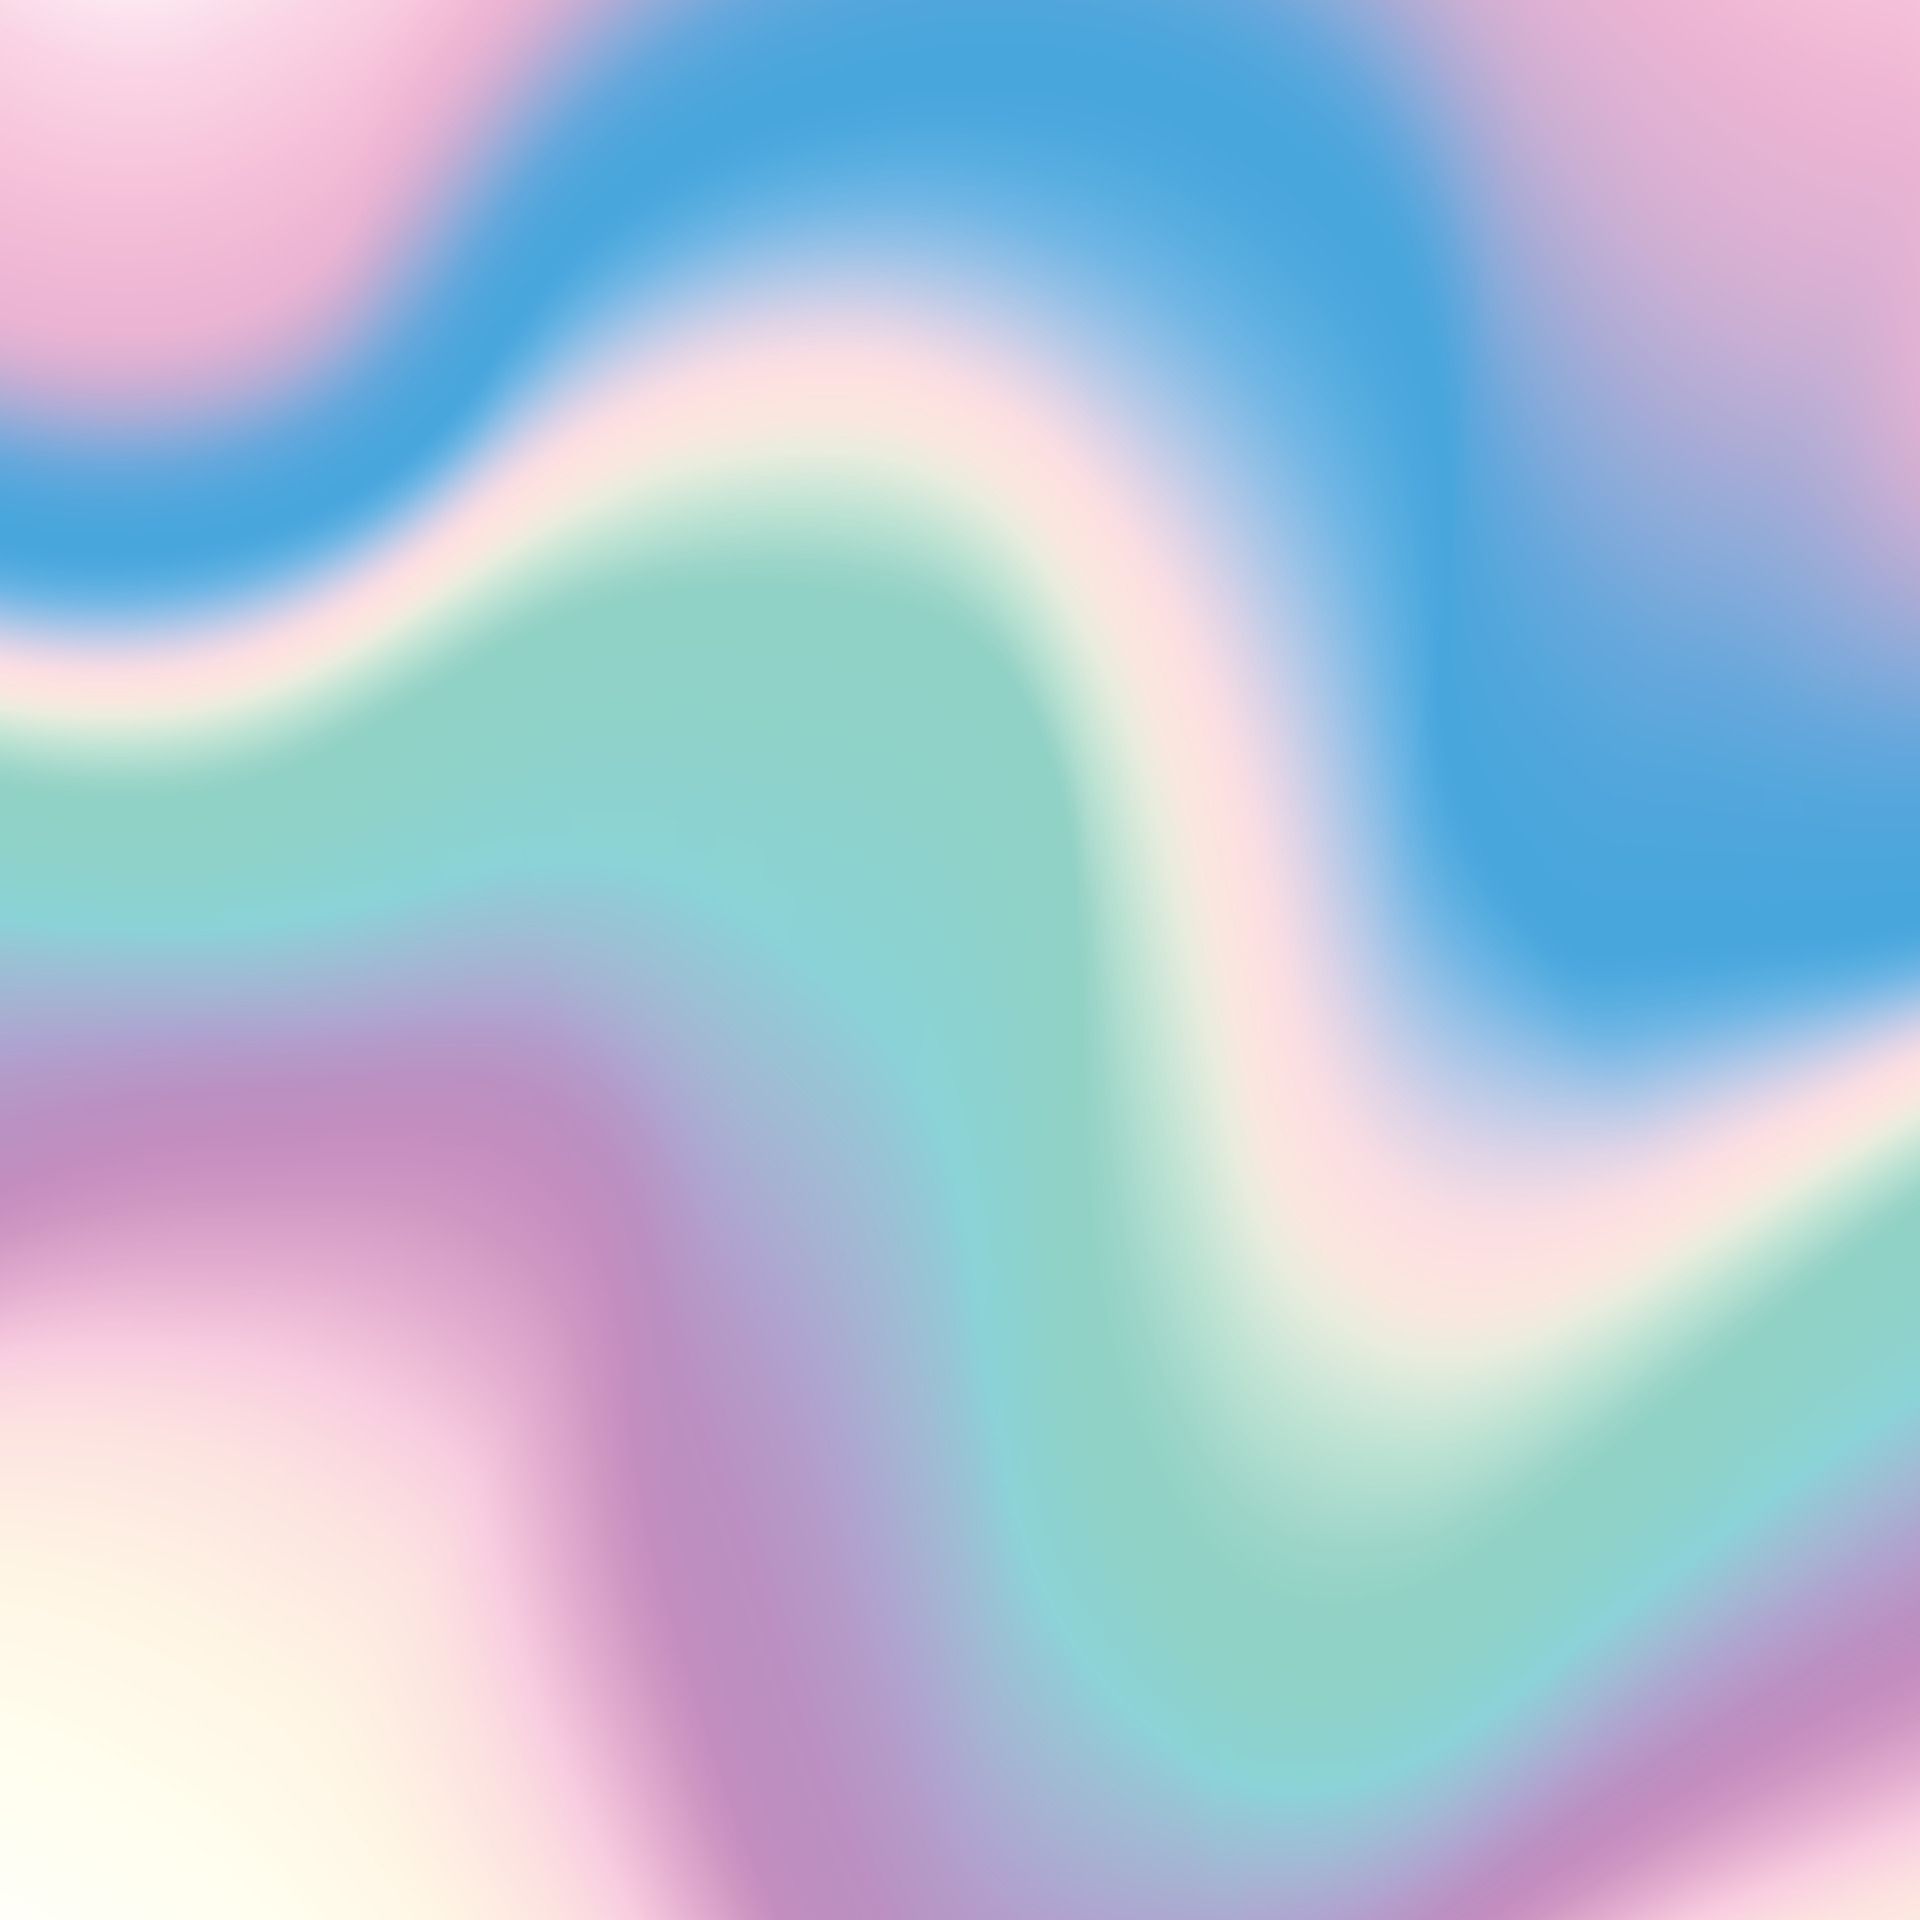 Abstract background of holographic foil. Wallpaper holographic pastel neon color surface with iridescent abstract. Illustration hologram Iridescent spectrum texture with soft curve and wave